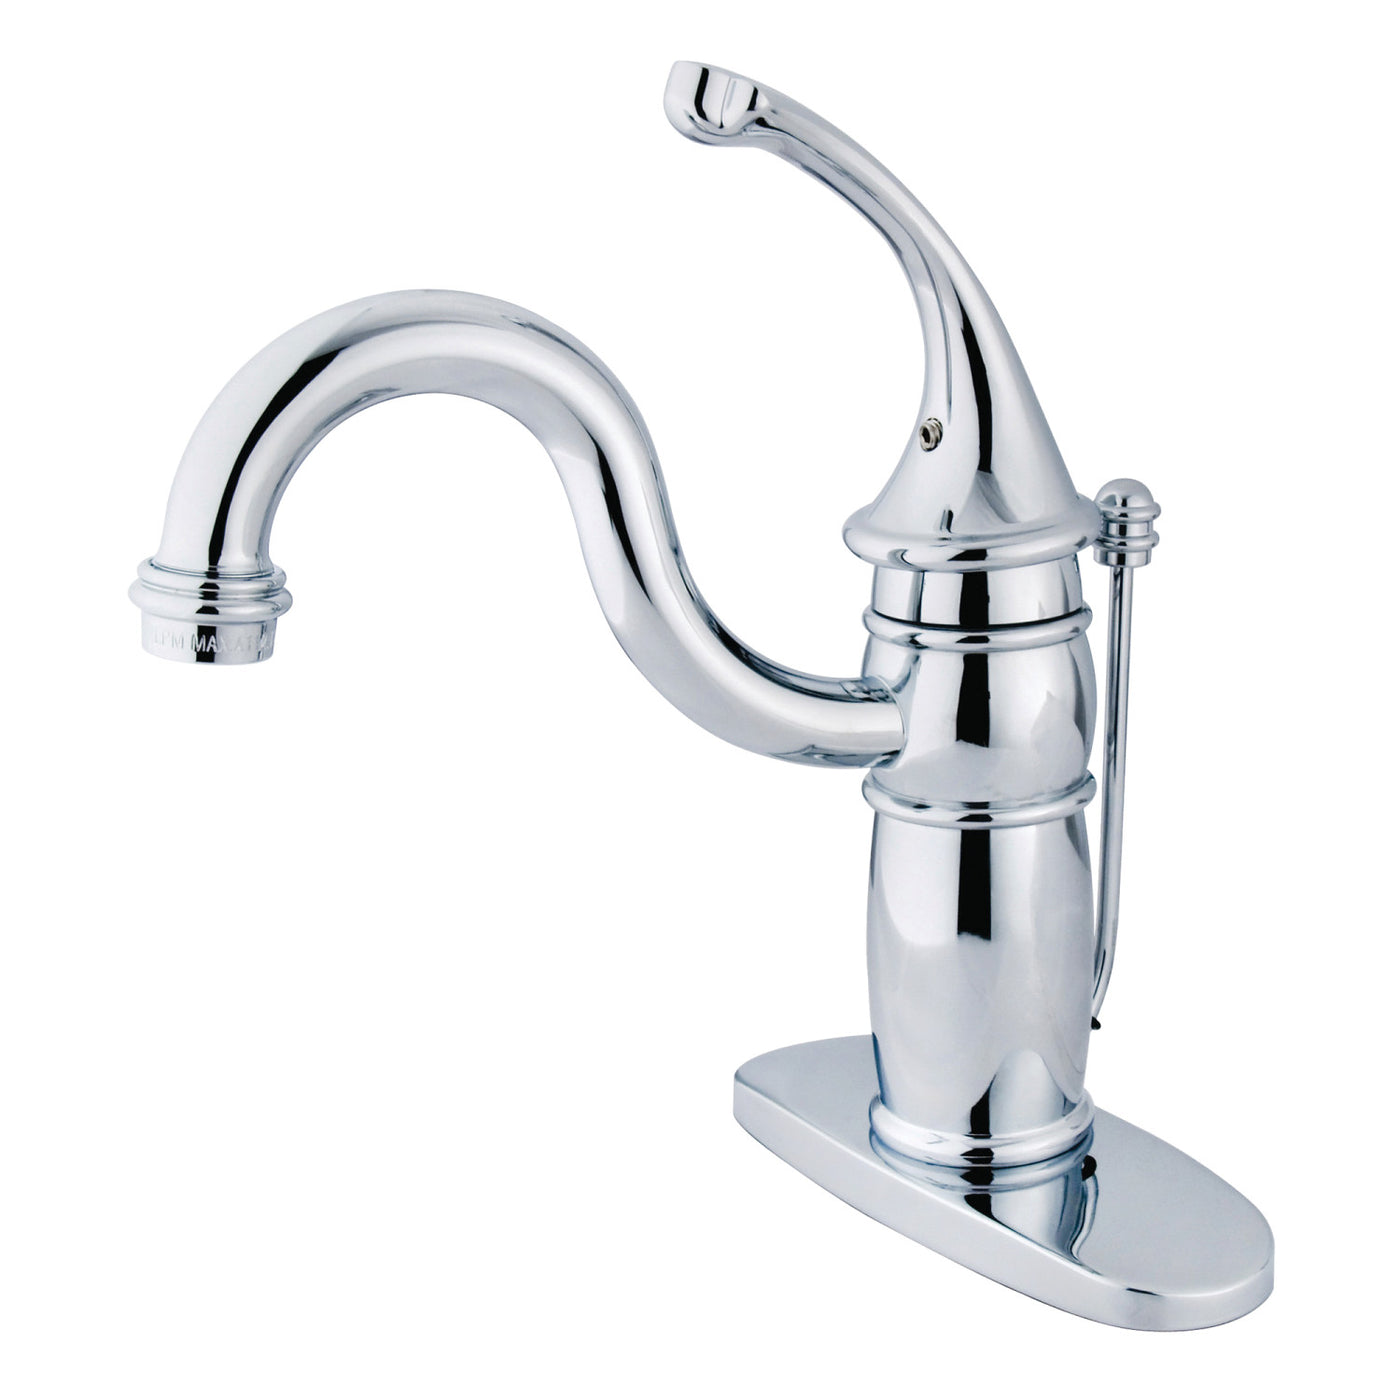 Elements of Design EB1401GL Single-Handle Bathroom Faucet with Pop-Up Drain, Polished Chrome